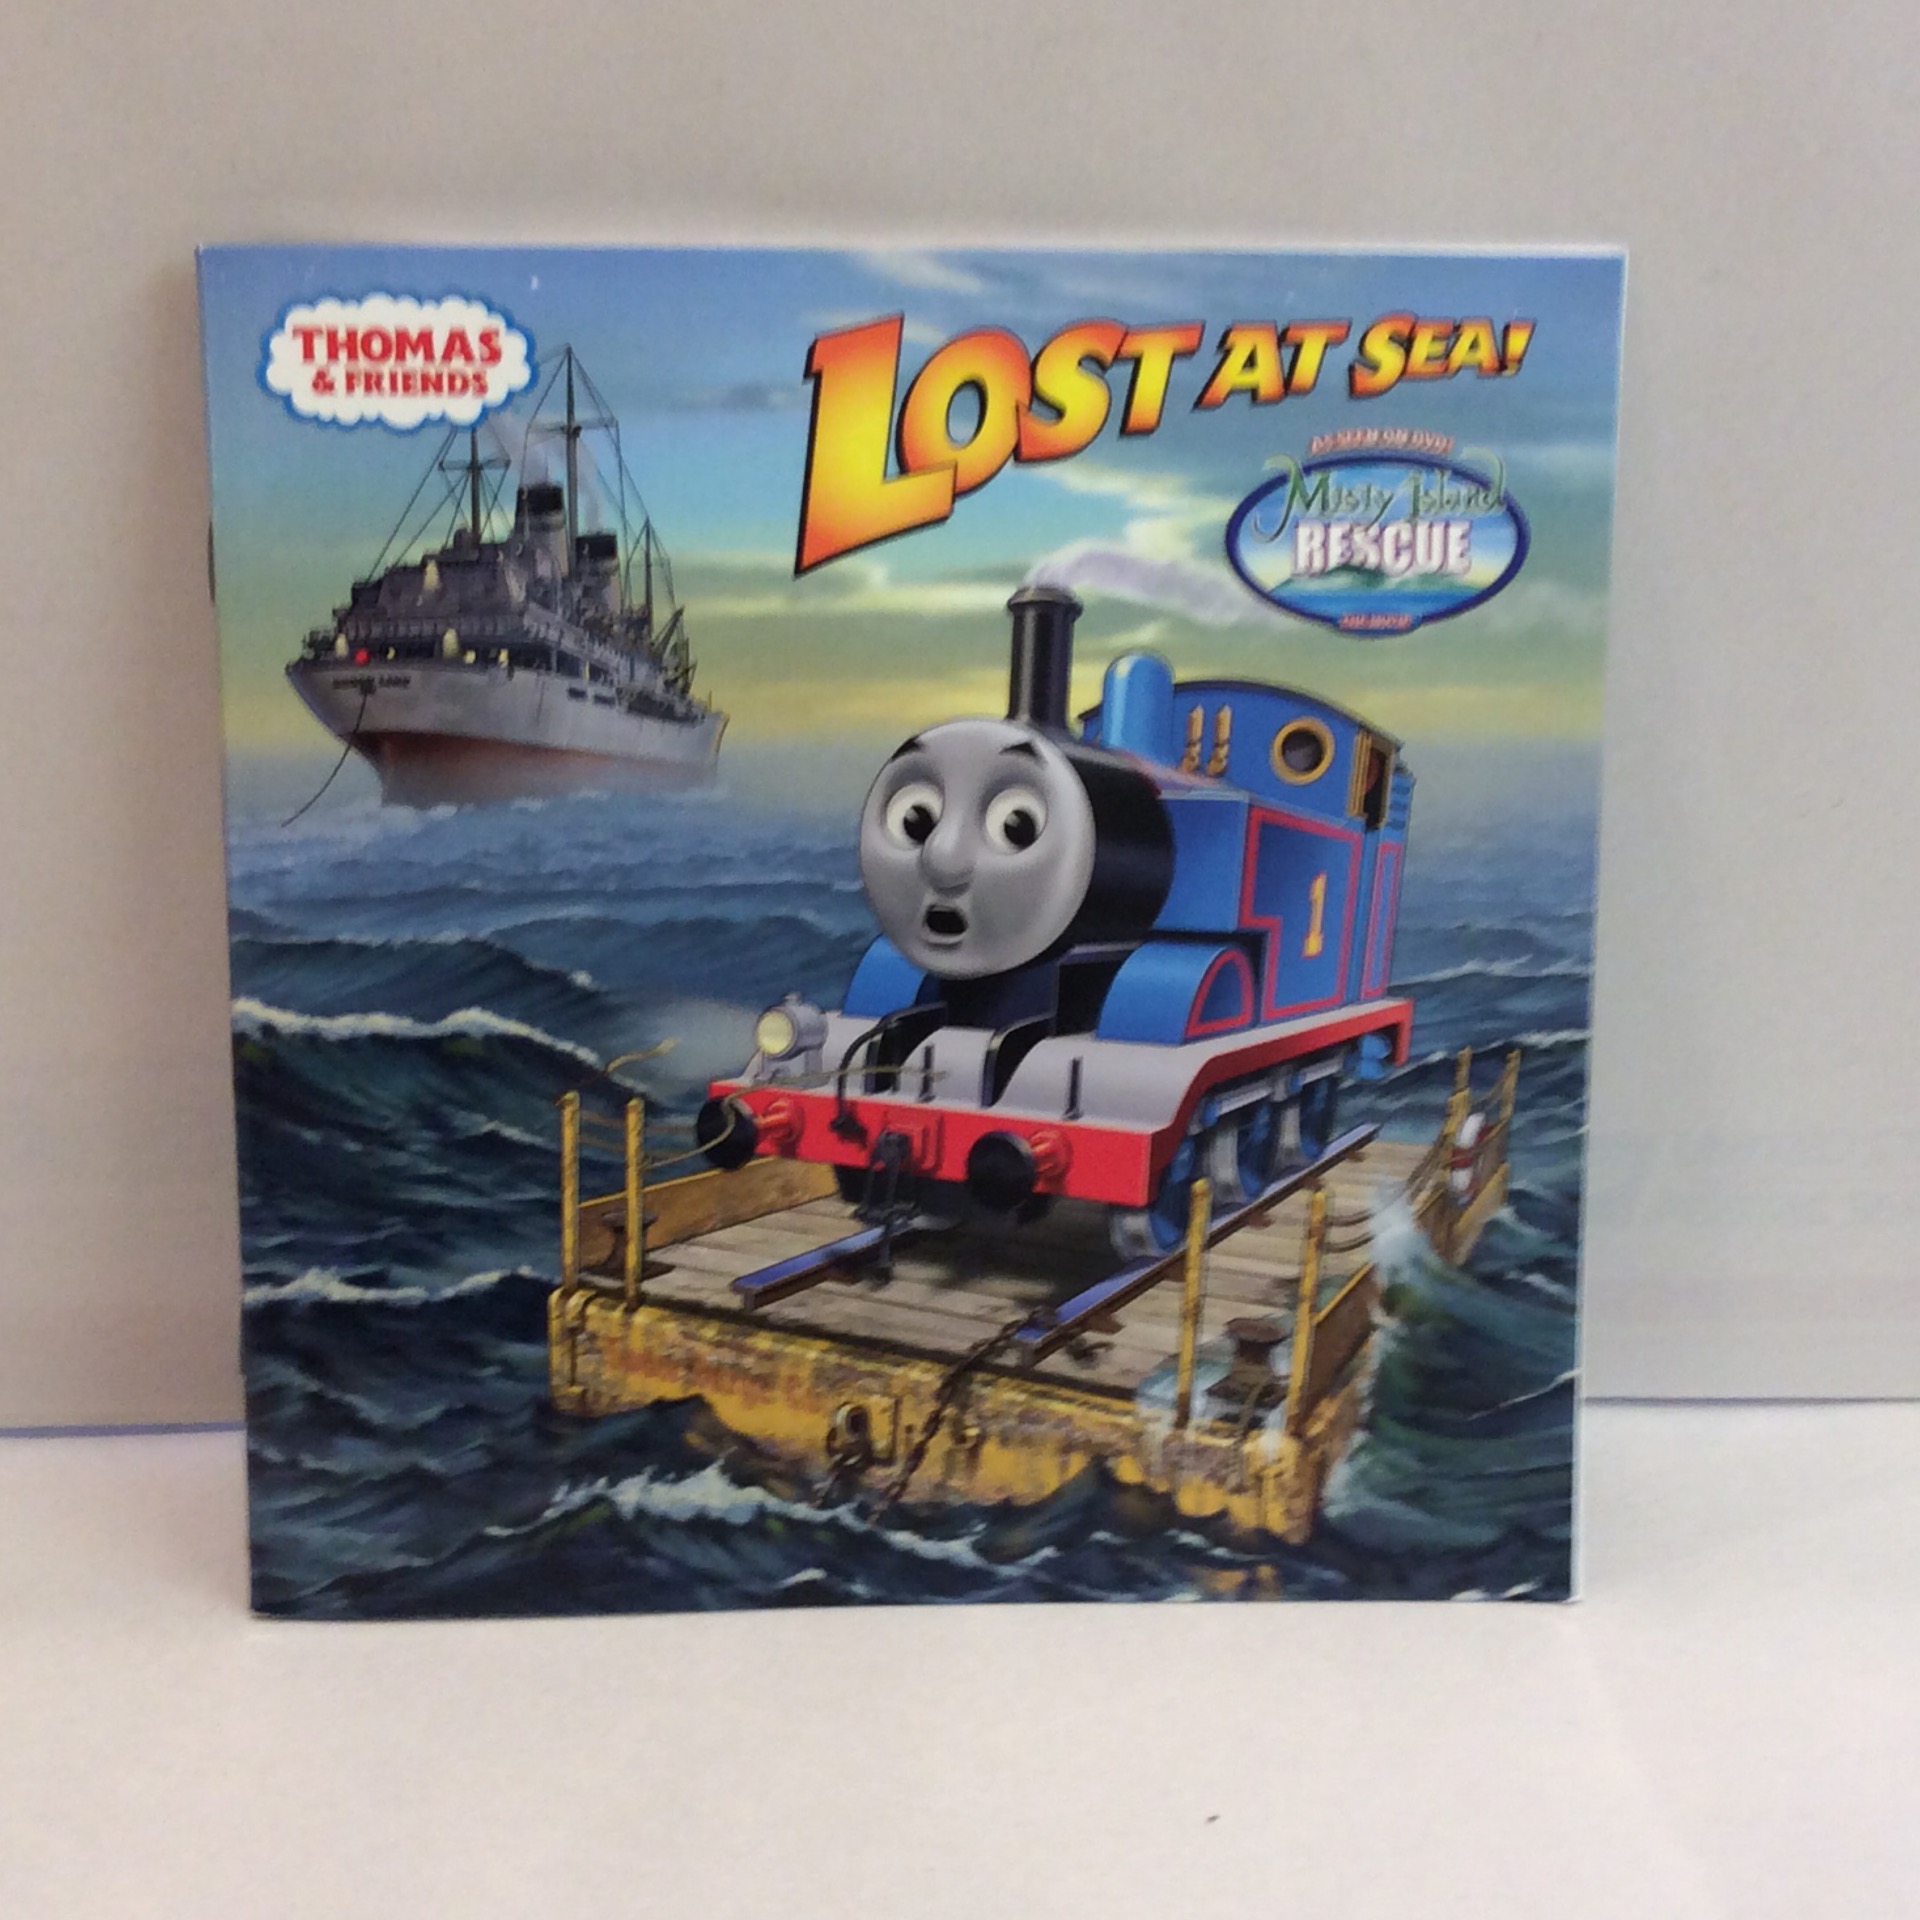 Prh Thomas Friends Lost At Sea Book Red Caboose Motel Restaurant Gift Shop